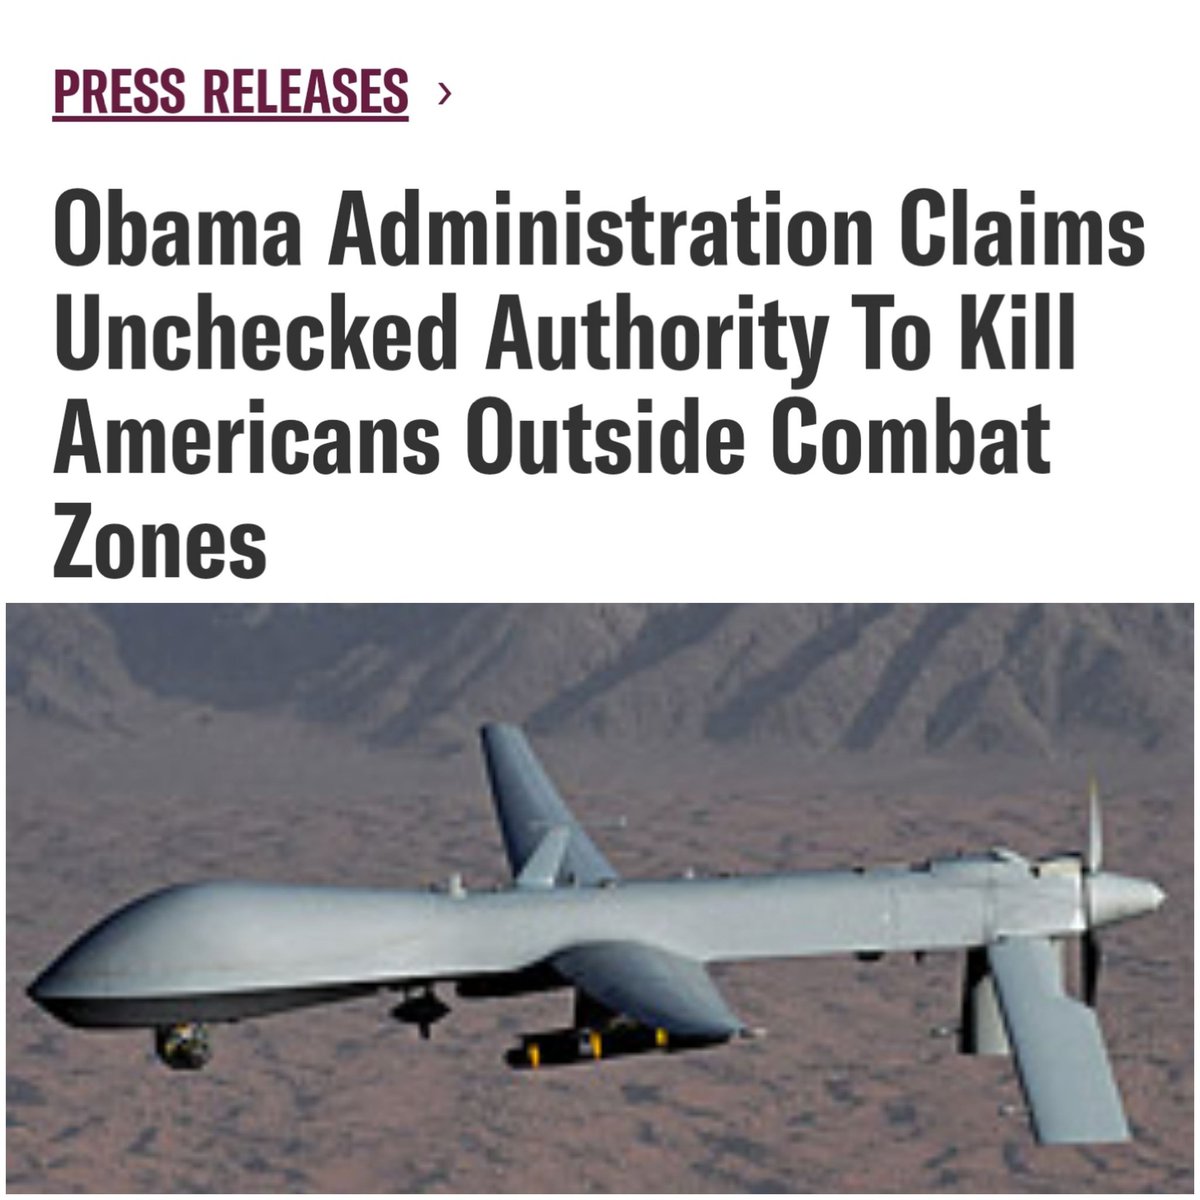 Barack Obama murdered American citizens with drone strikes under the excuse of 'terrorism' He was never charged or convicted for these crimes. The International Criminal Court never charged him.